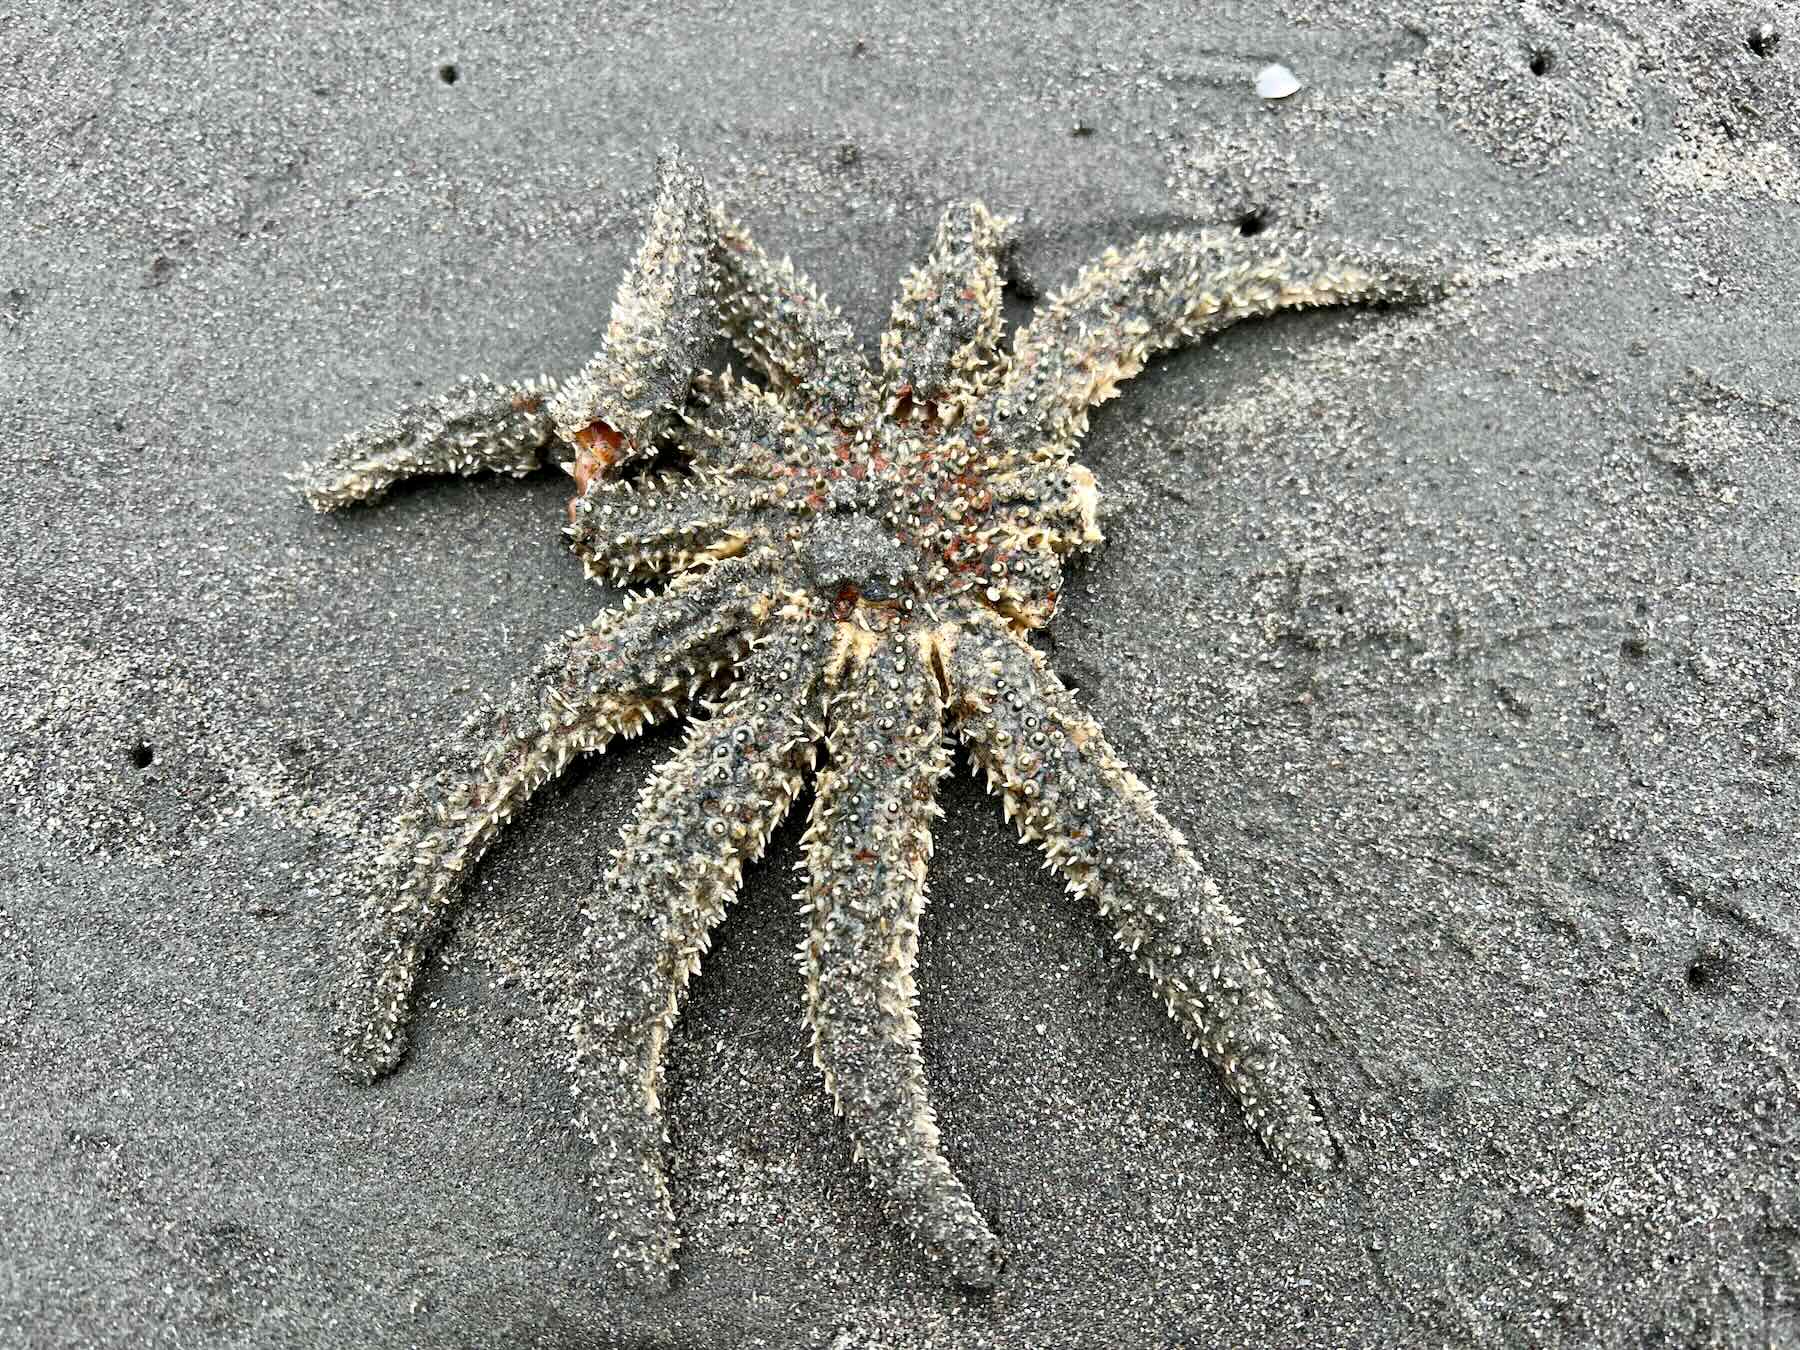 Eleven-Armed Sea Star, with two shortened arms, on sand. 